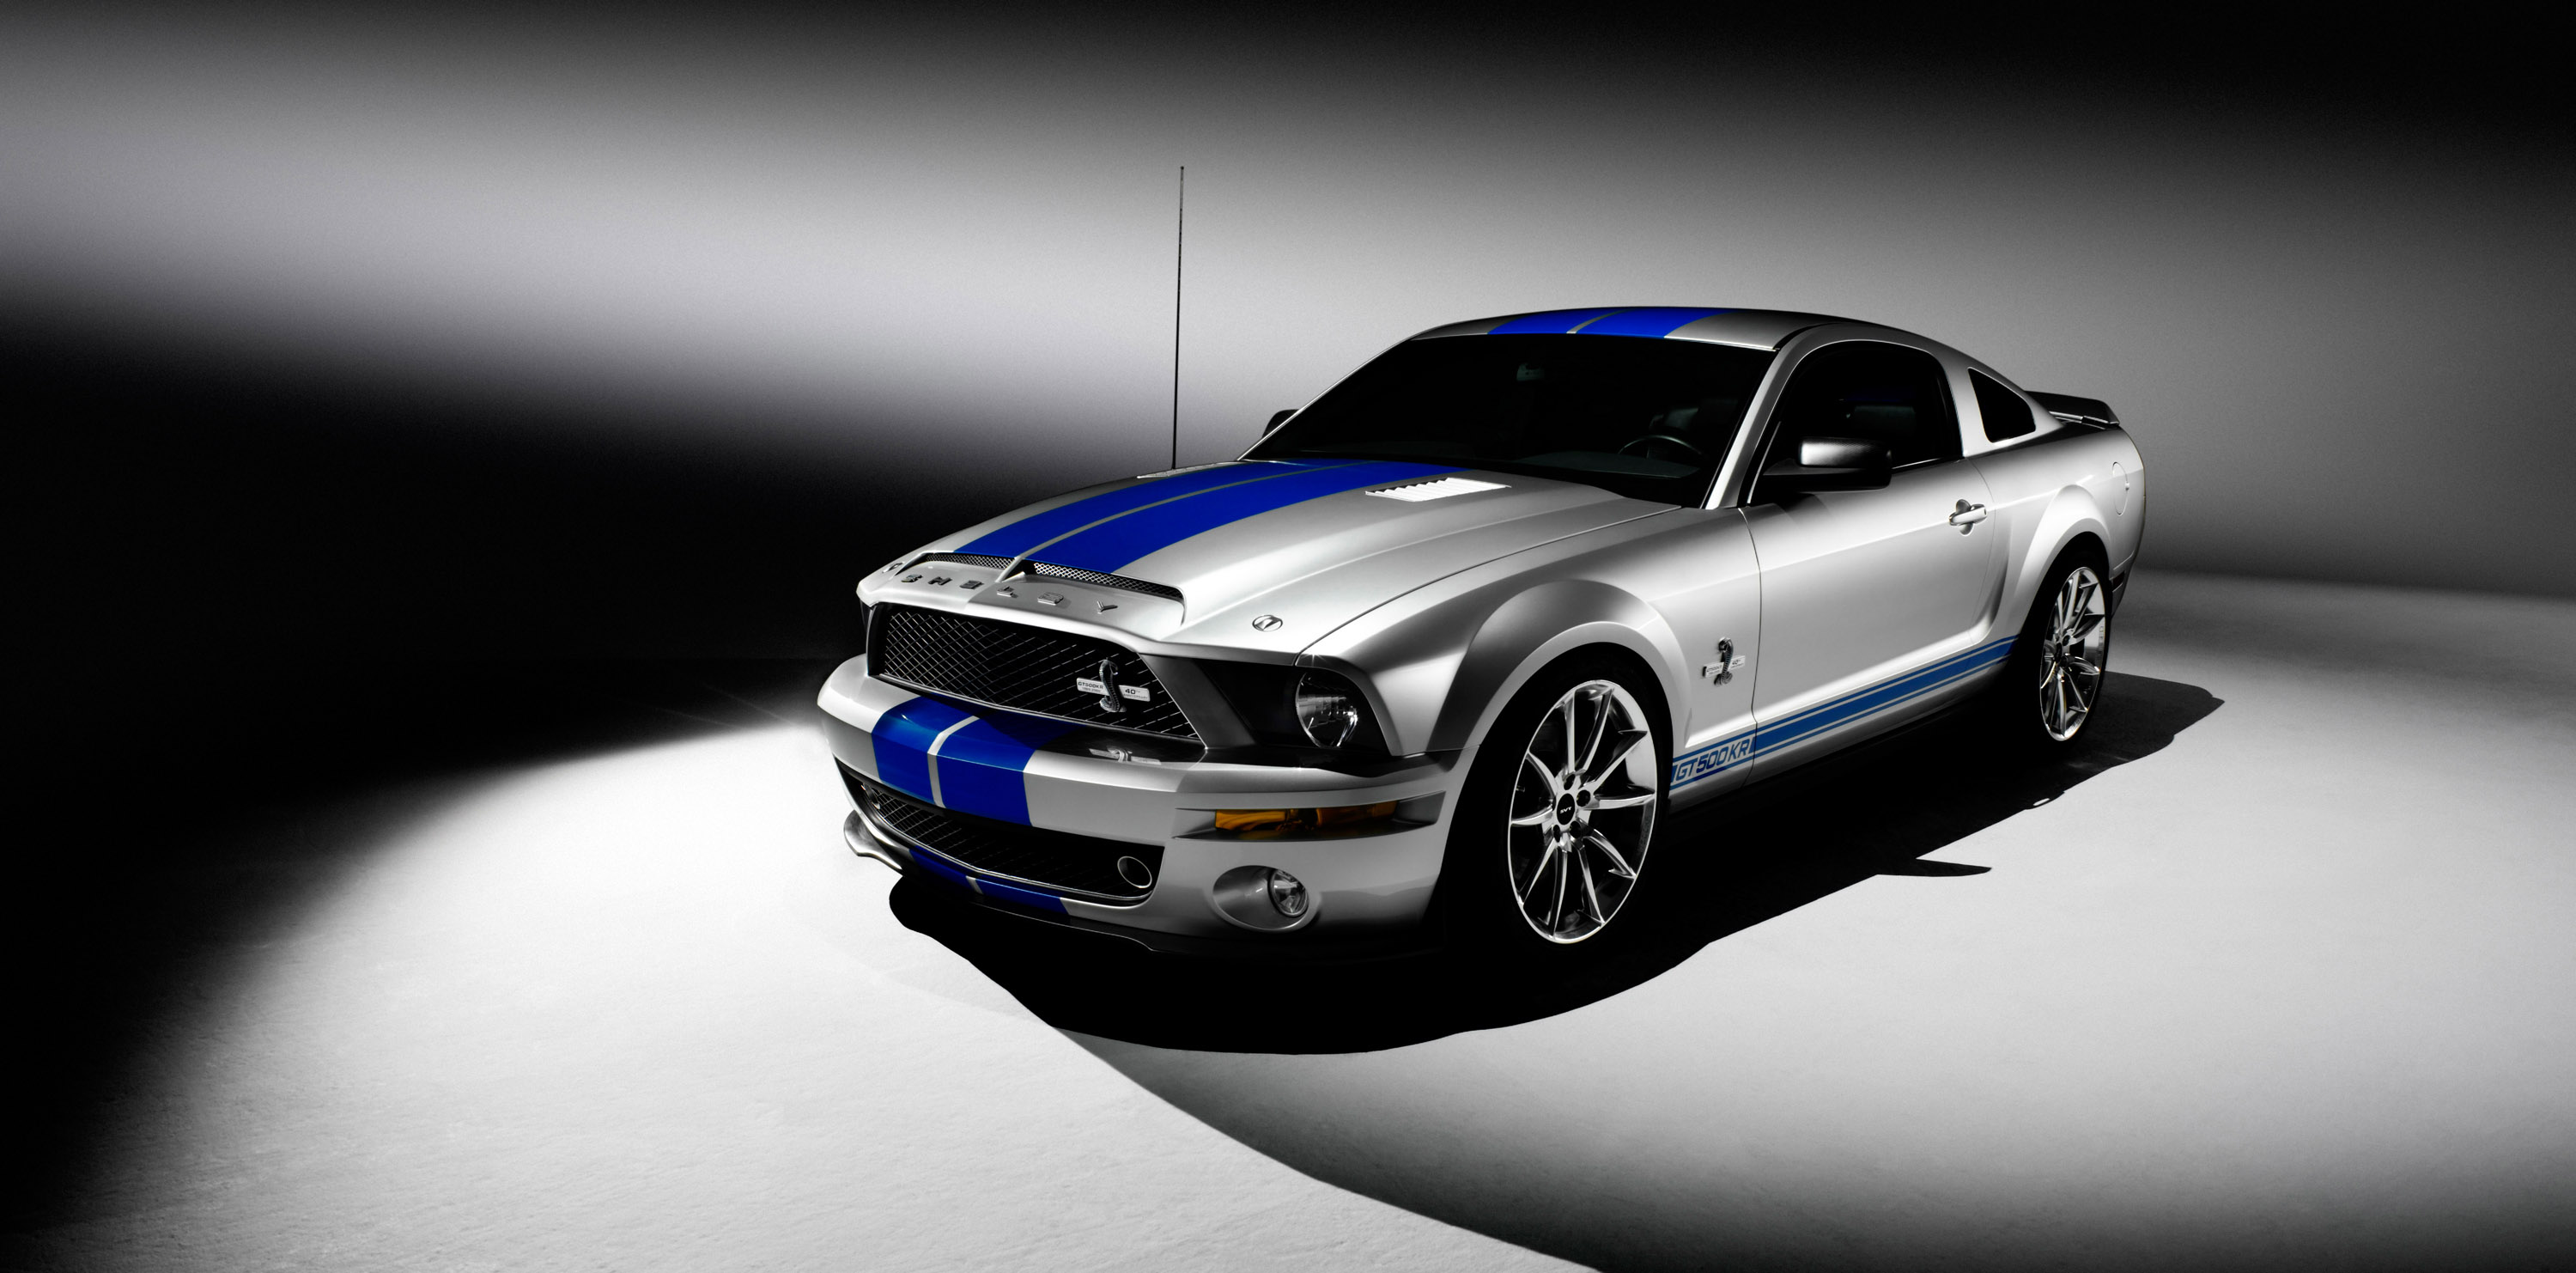 https://www.automobilesreview.com/gallery/ford-mustang-shelby-gt500kr/ford-mustang-shelby-gt500-kr-01.jpg